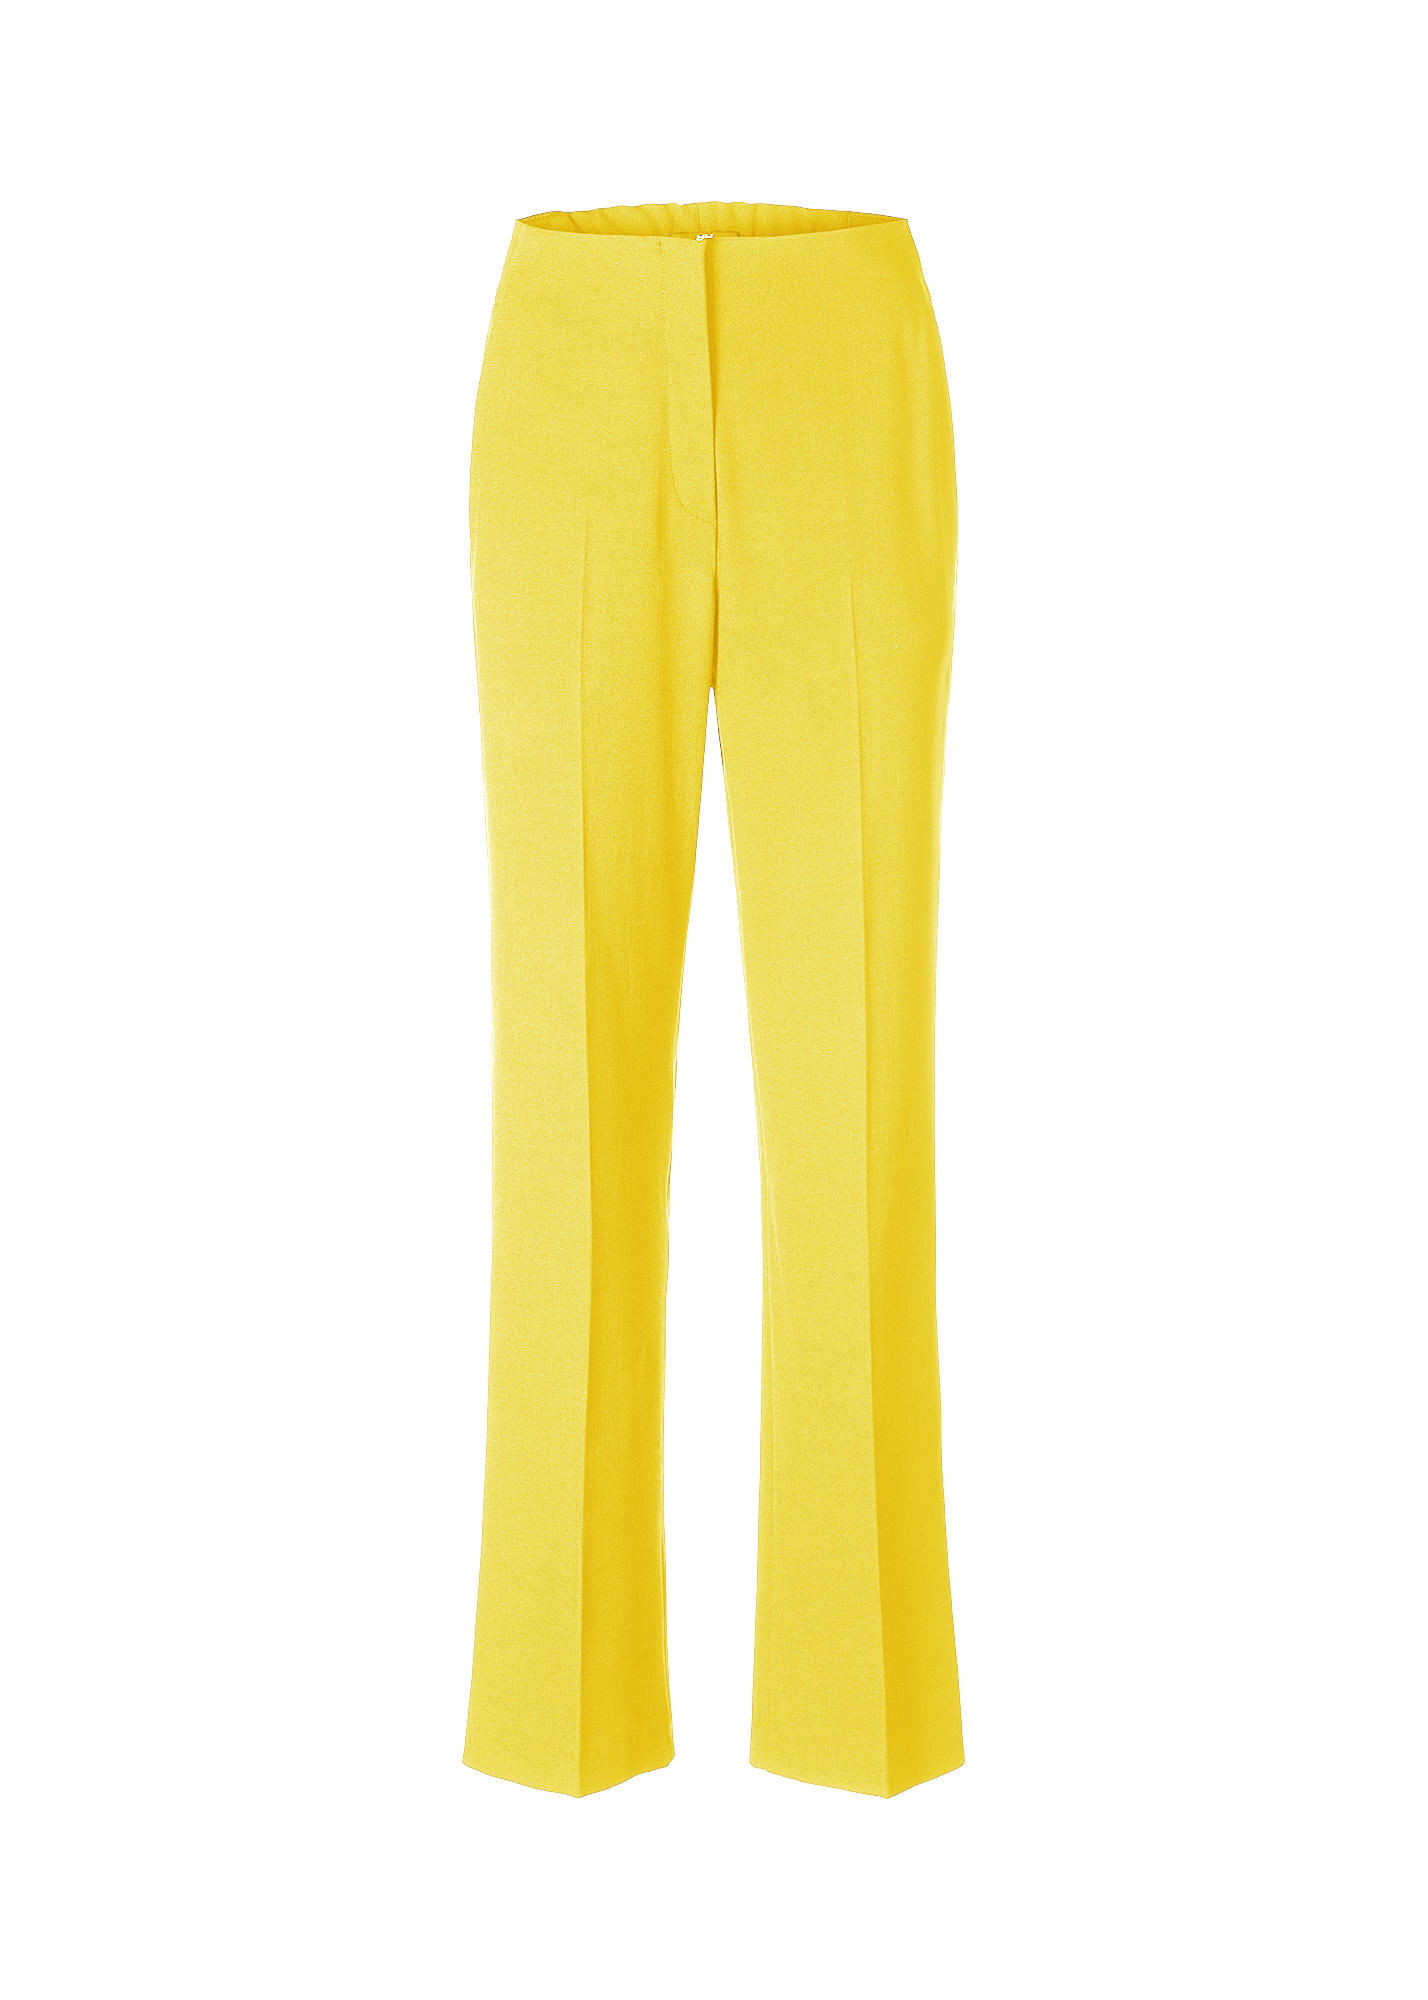 RIANI-OUTLET-SALE-Hose-wide-fit-Hosen-ARCHIVE-COLLECTION_4027c493-c328-4b70-aa02-8f98a7eea4fc.png